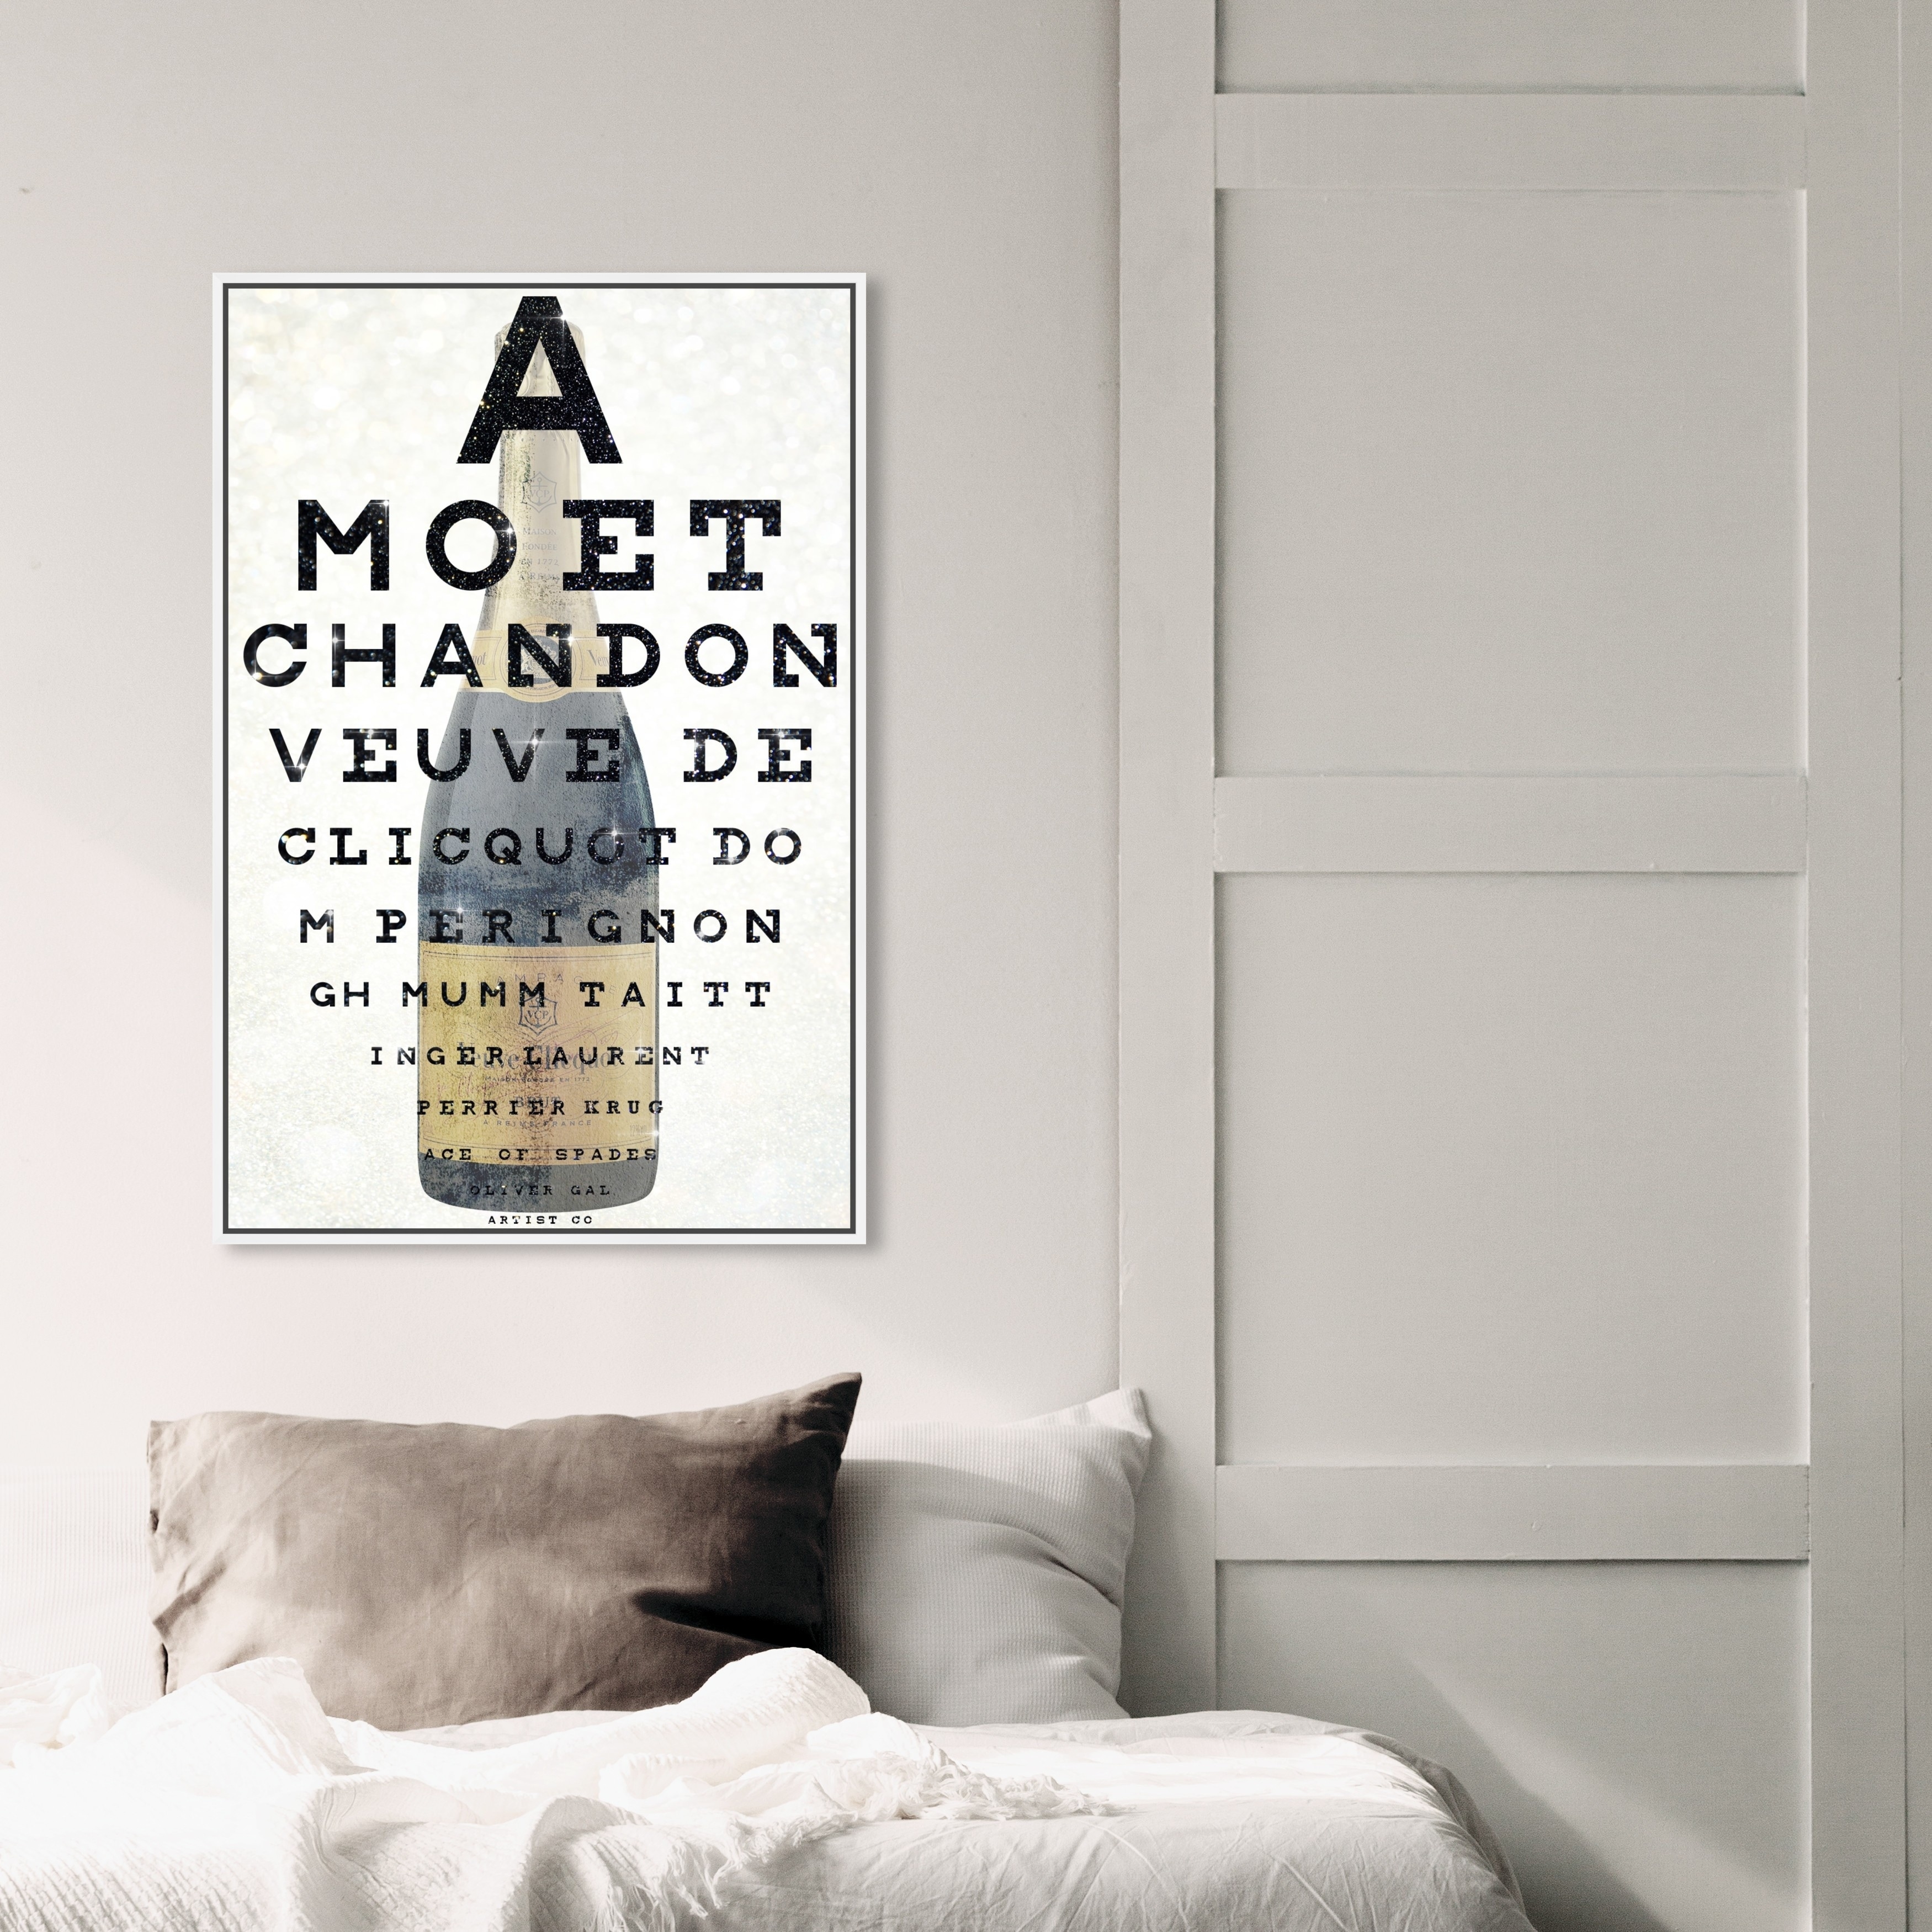 Drinks and Spirits Champagne Bottle Eye Chart - Wrapped Canvas Graphic Art Print Oliver Gal Size: 36 H x 24 W